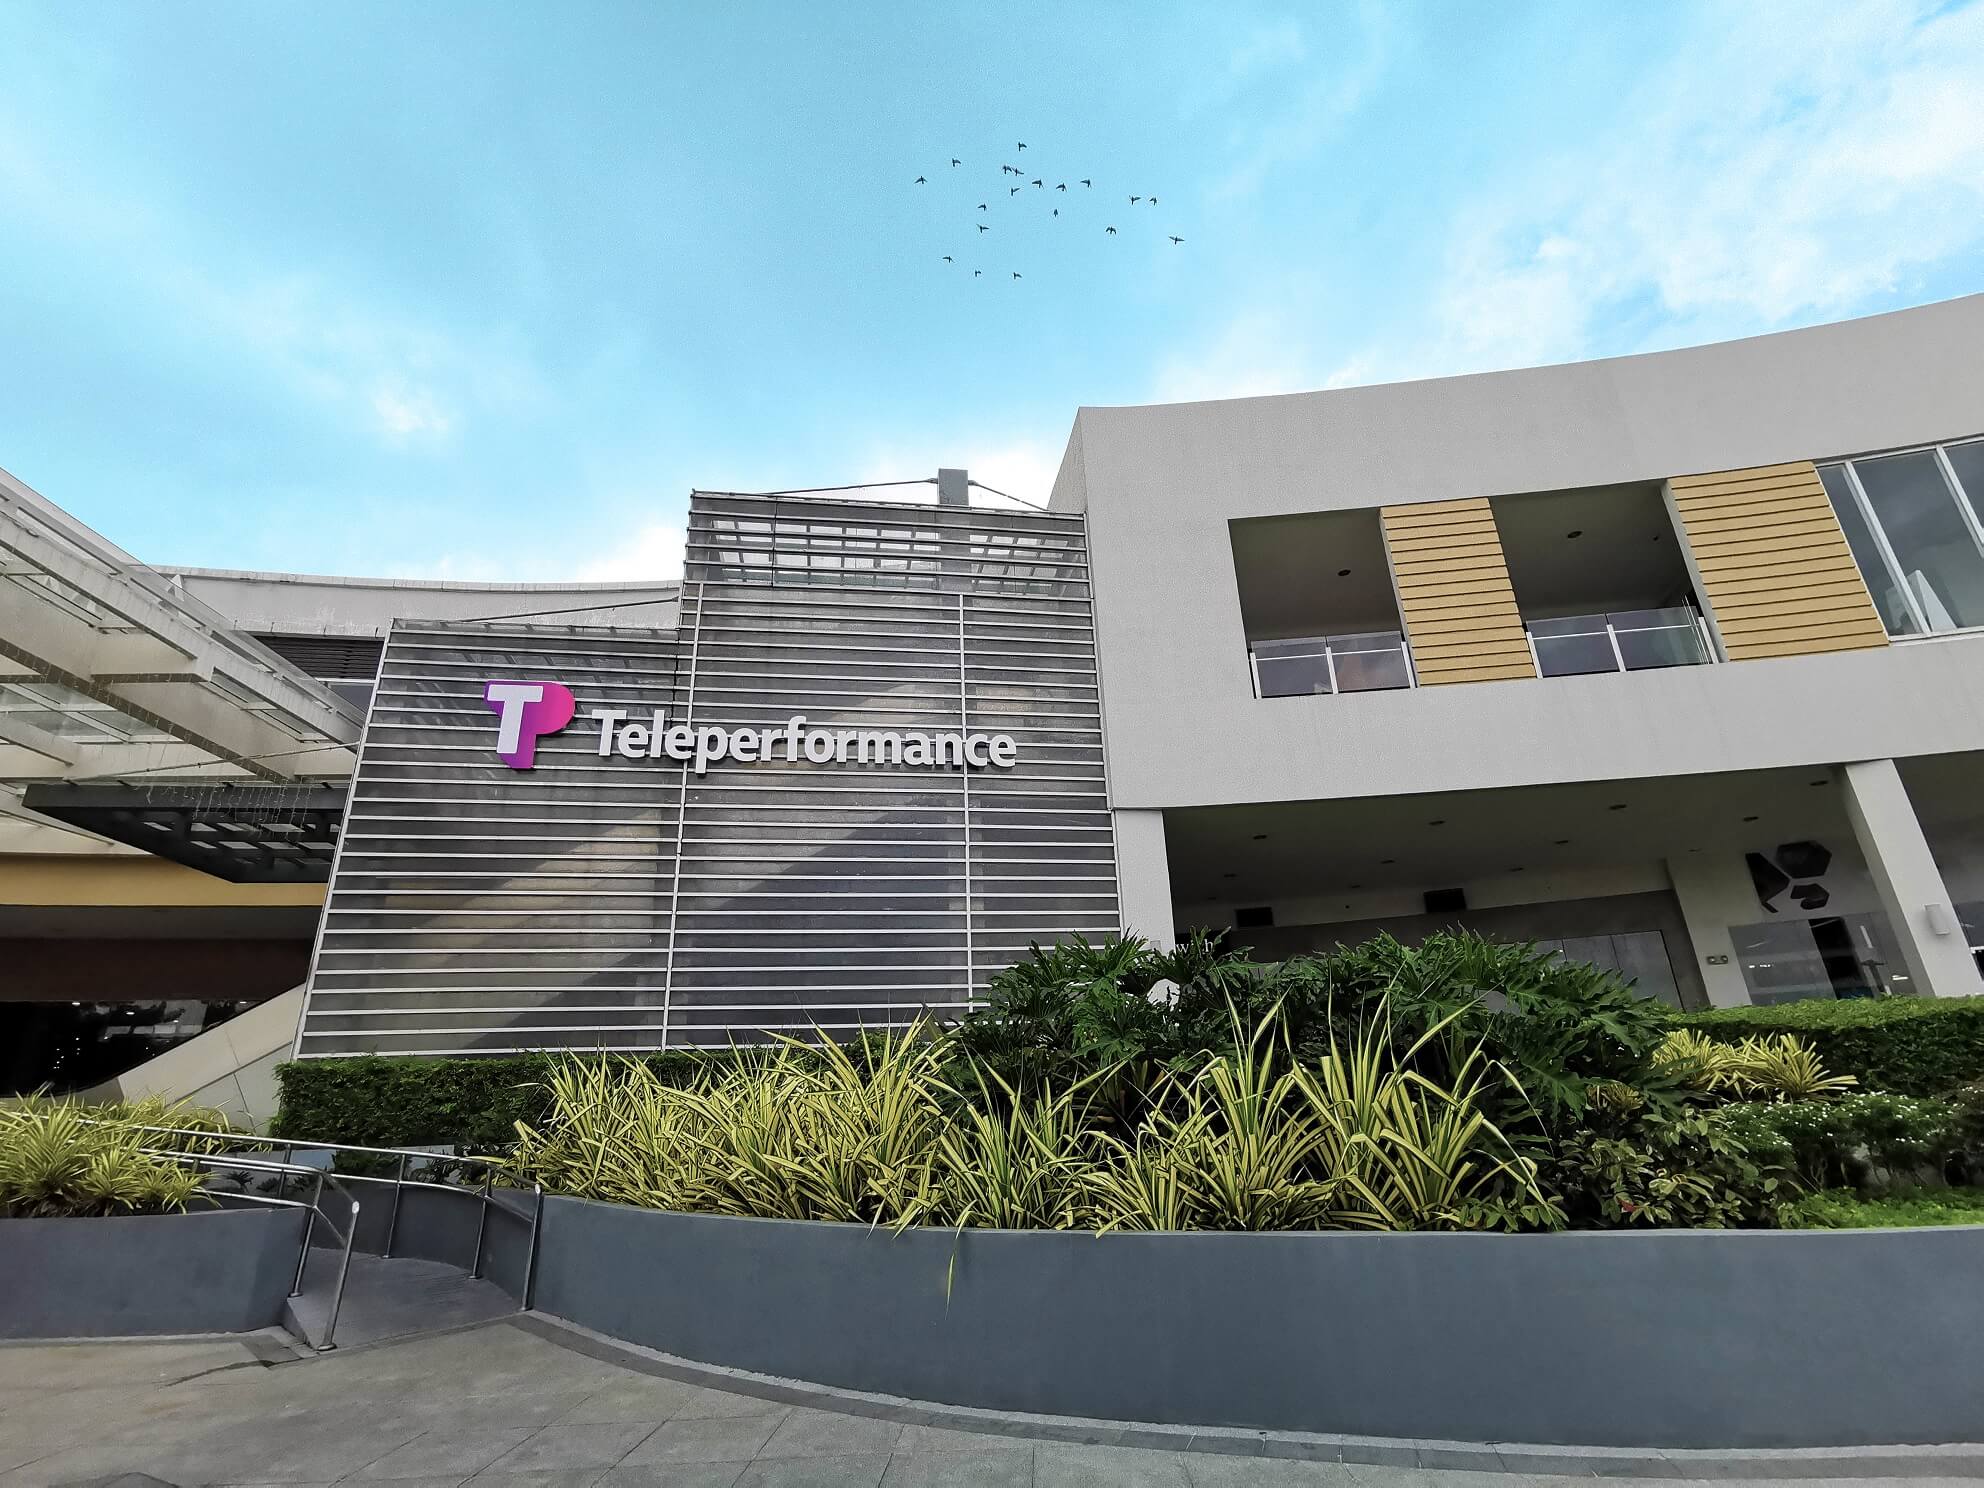 Teleperformance lauded for successfully navigating new normal